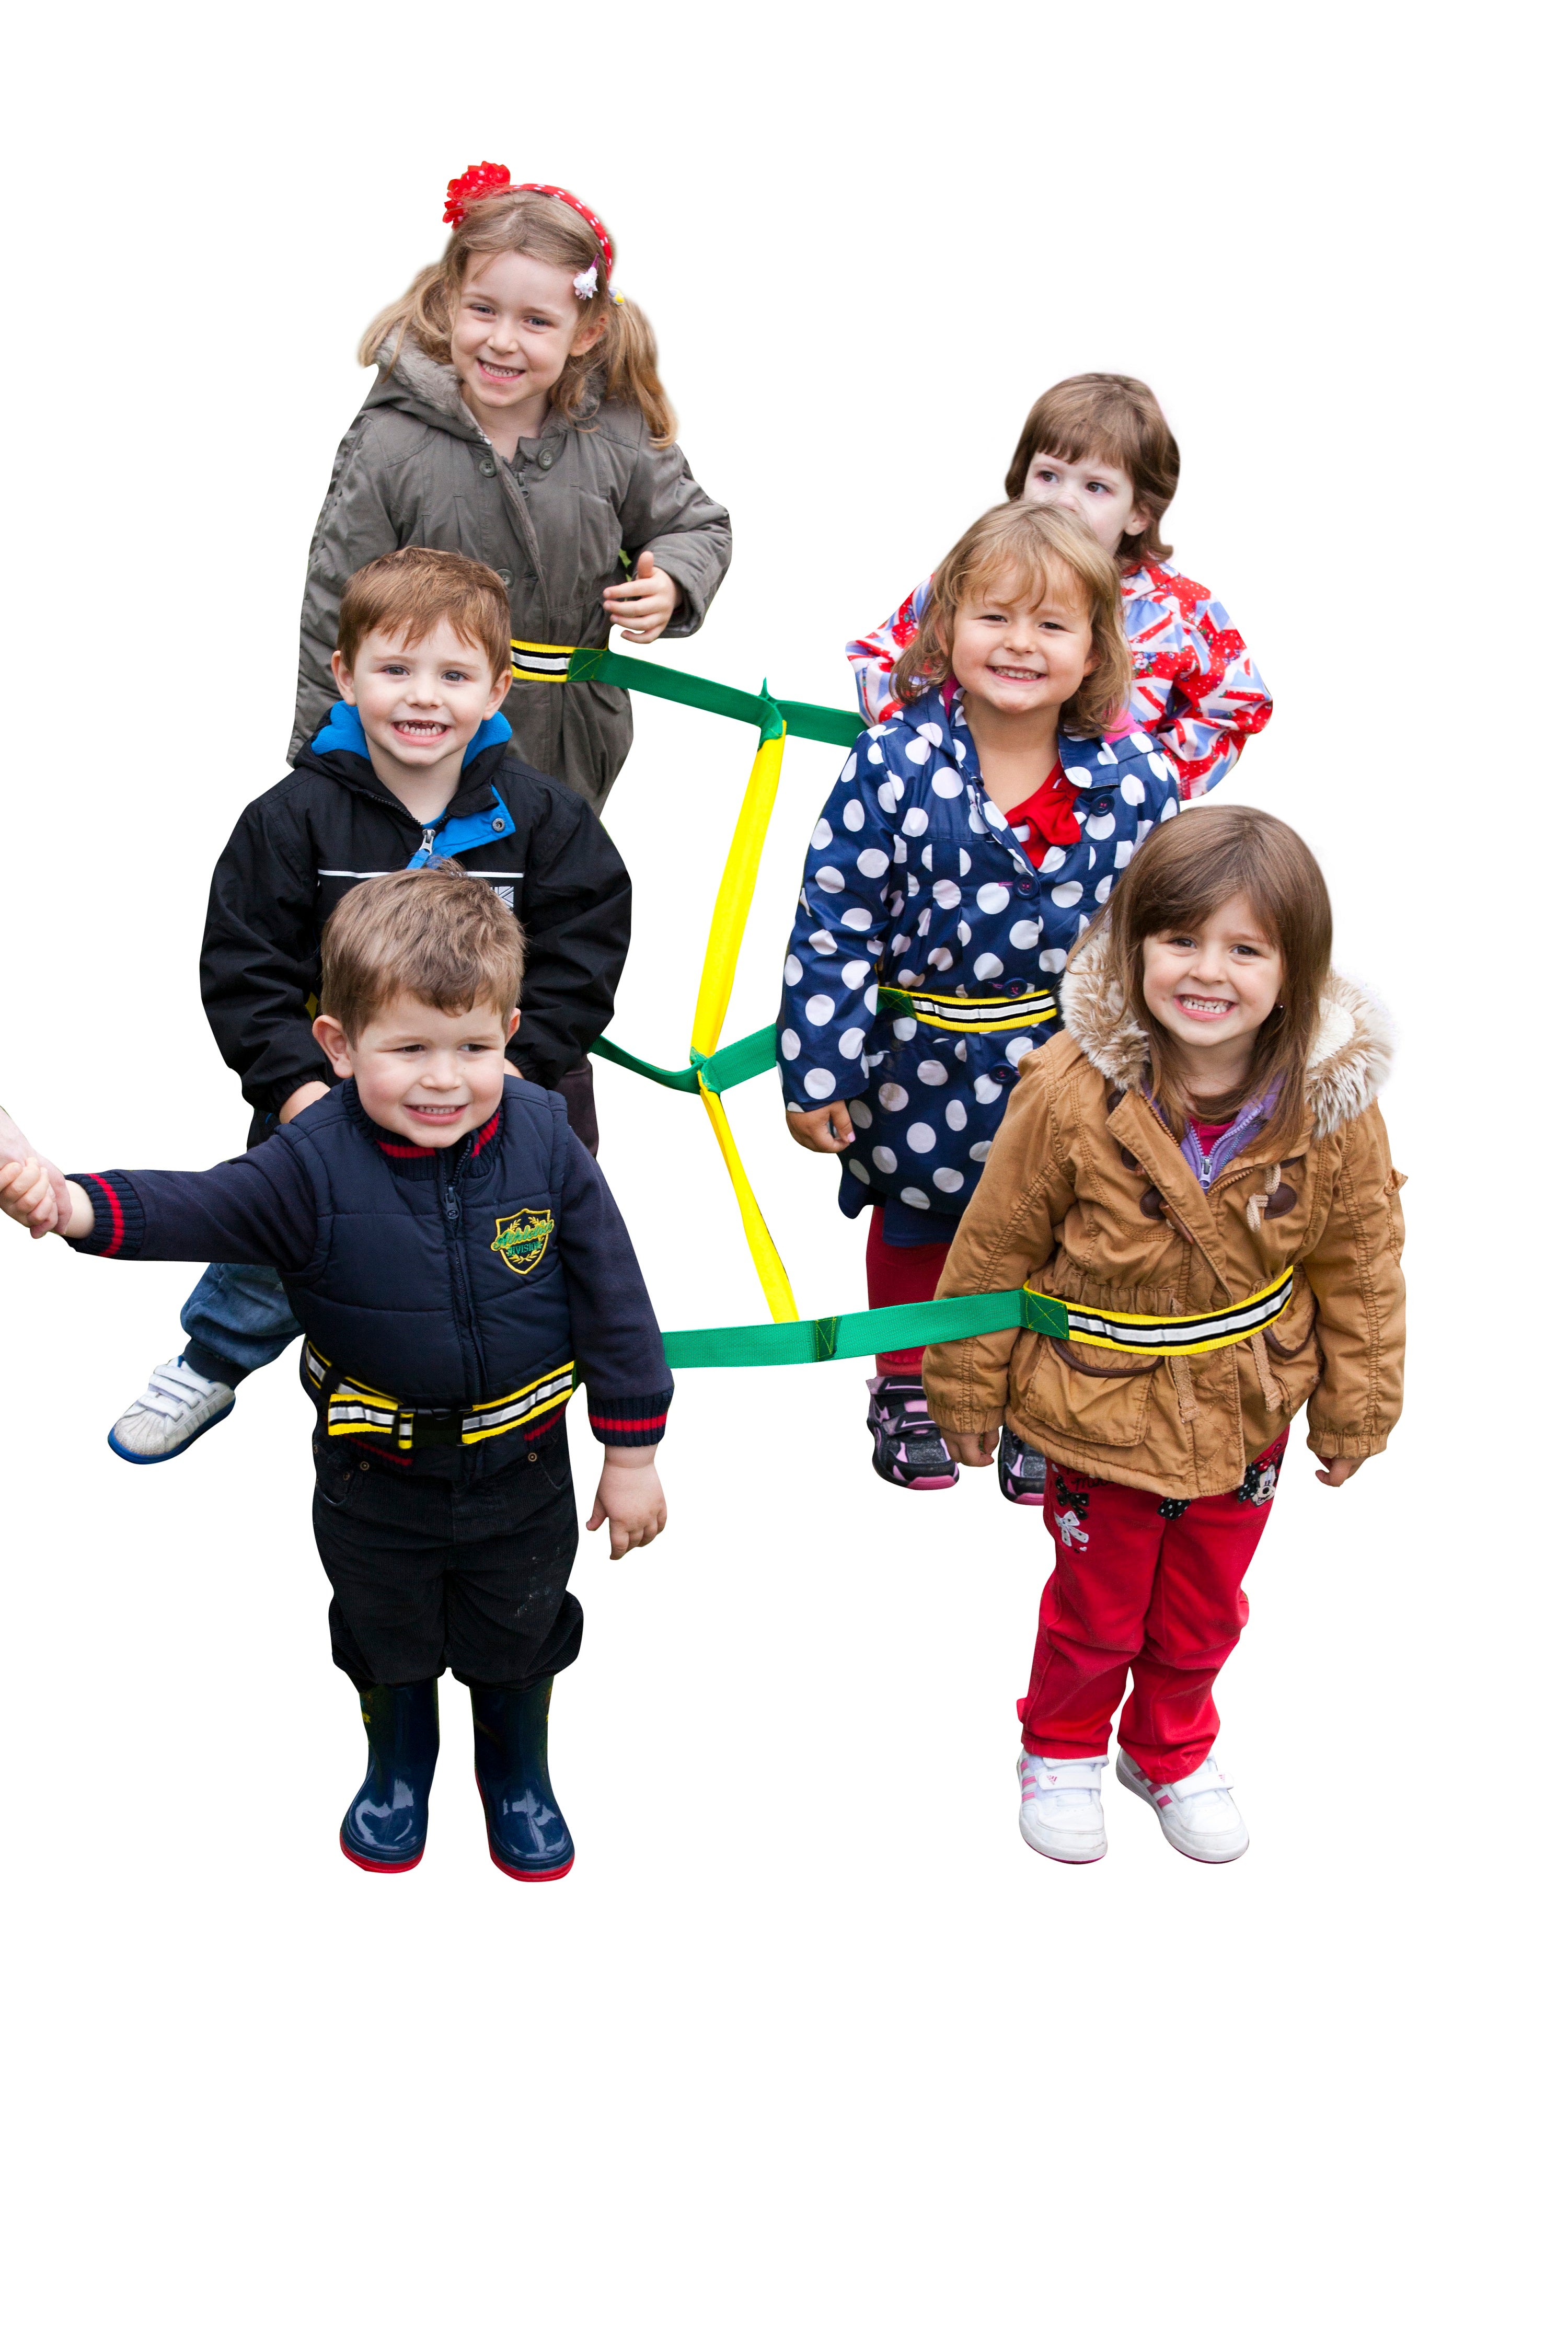 Walkodile Safety Web - the fun, safe walking rope for six children.